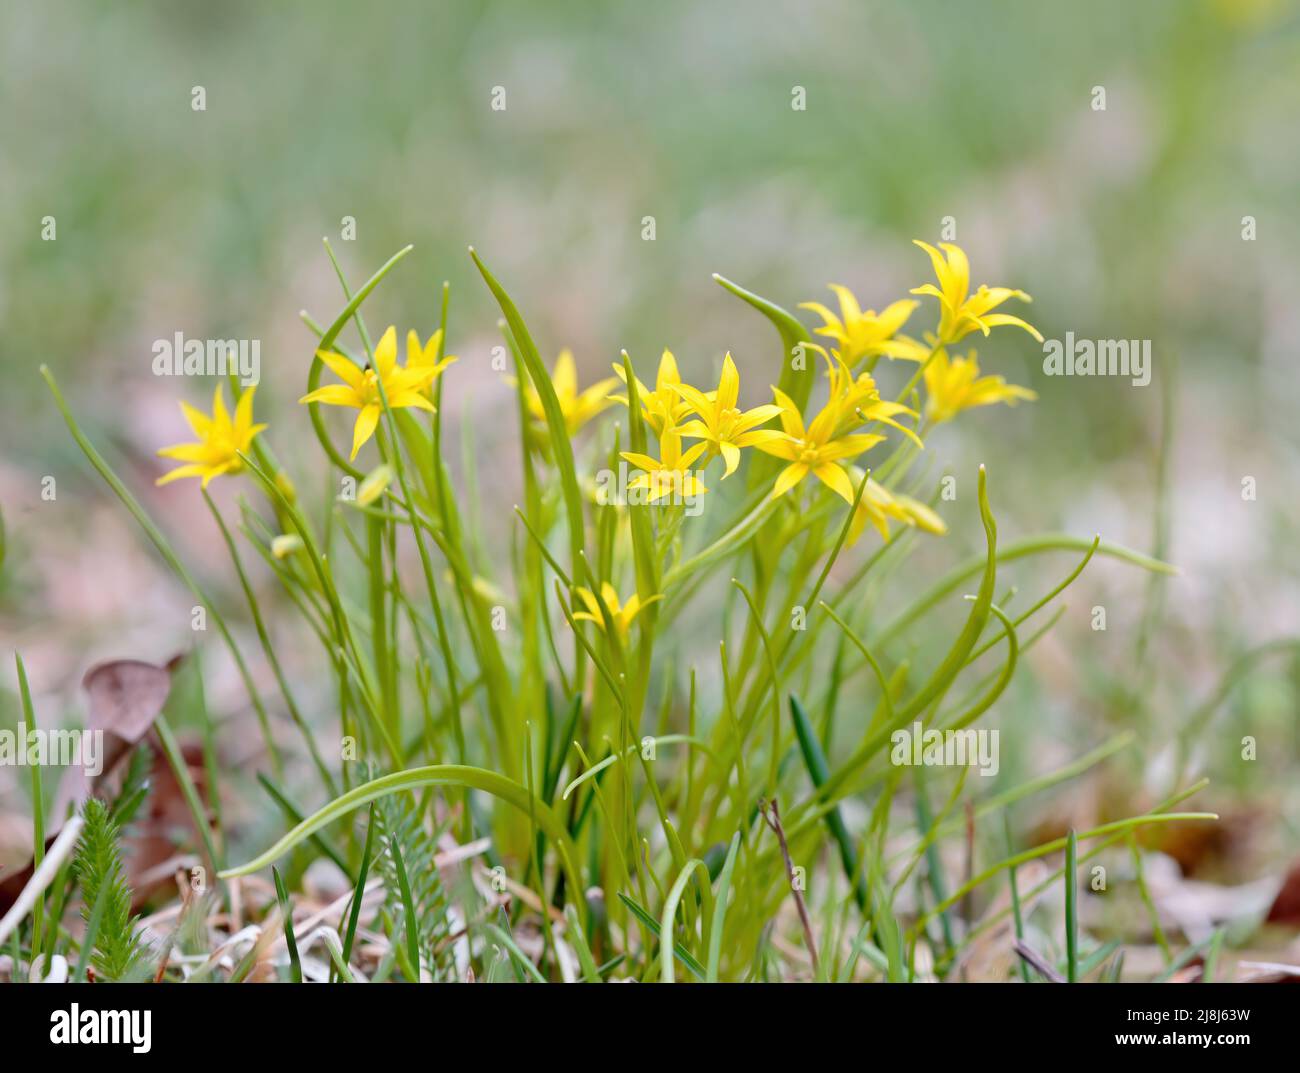 Gagea minima flowers blooming on a spring day Stock Photo